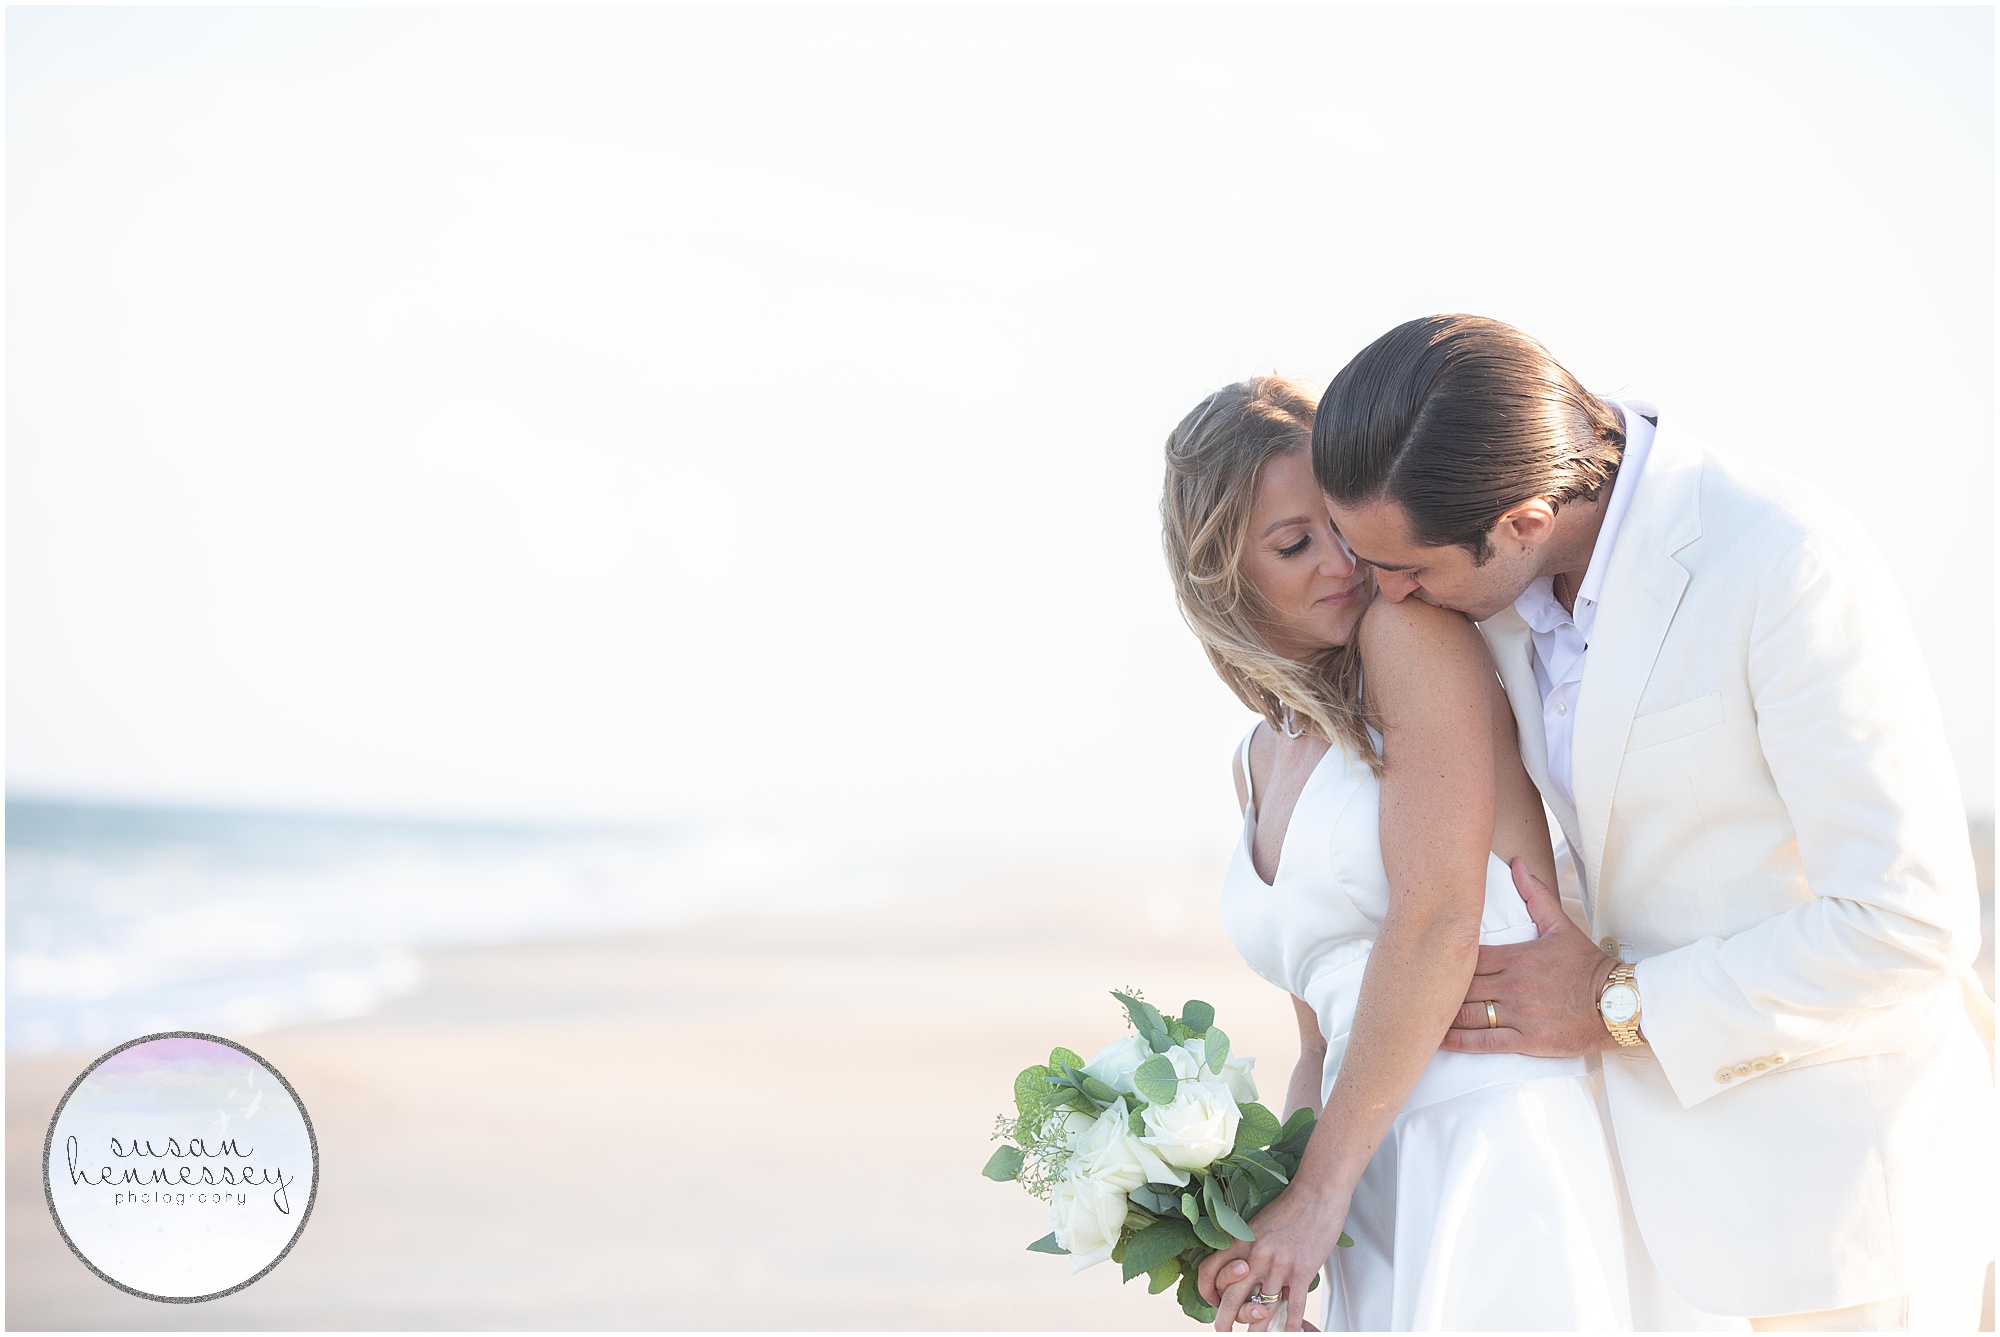 A sweet moment between a bride and groom at their South Jersey microwedding